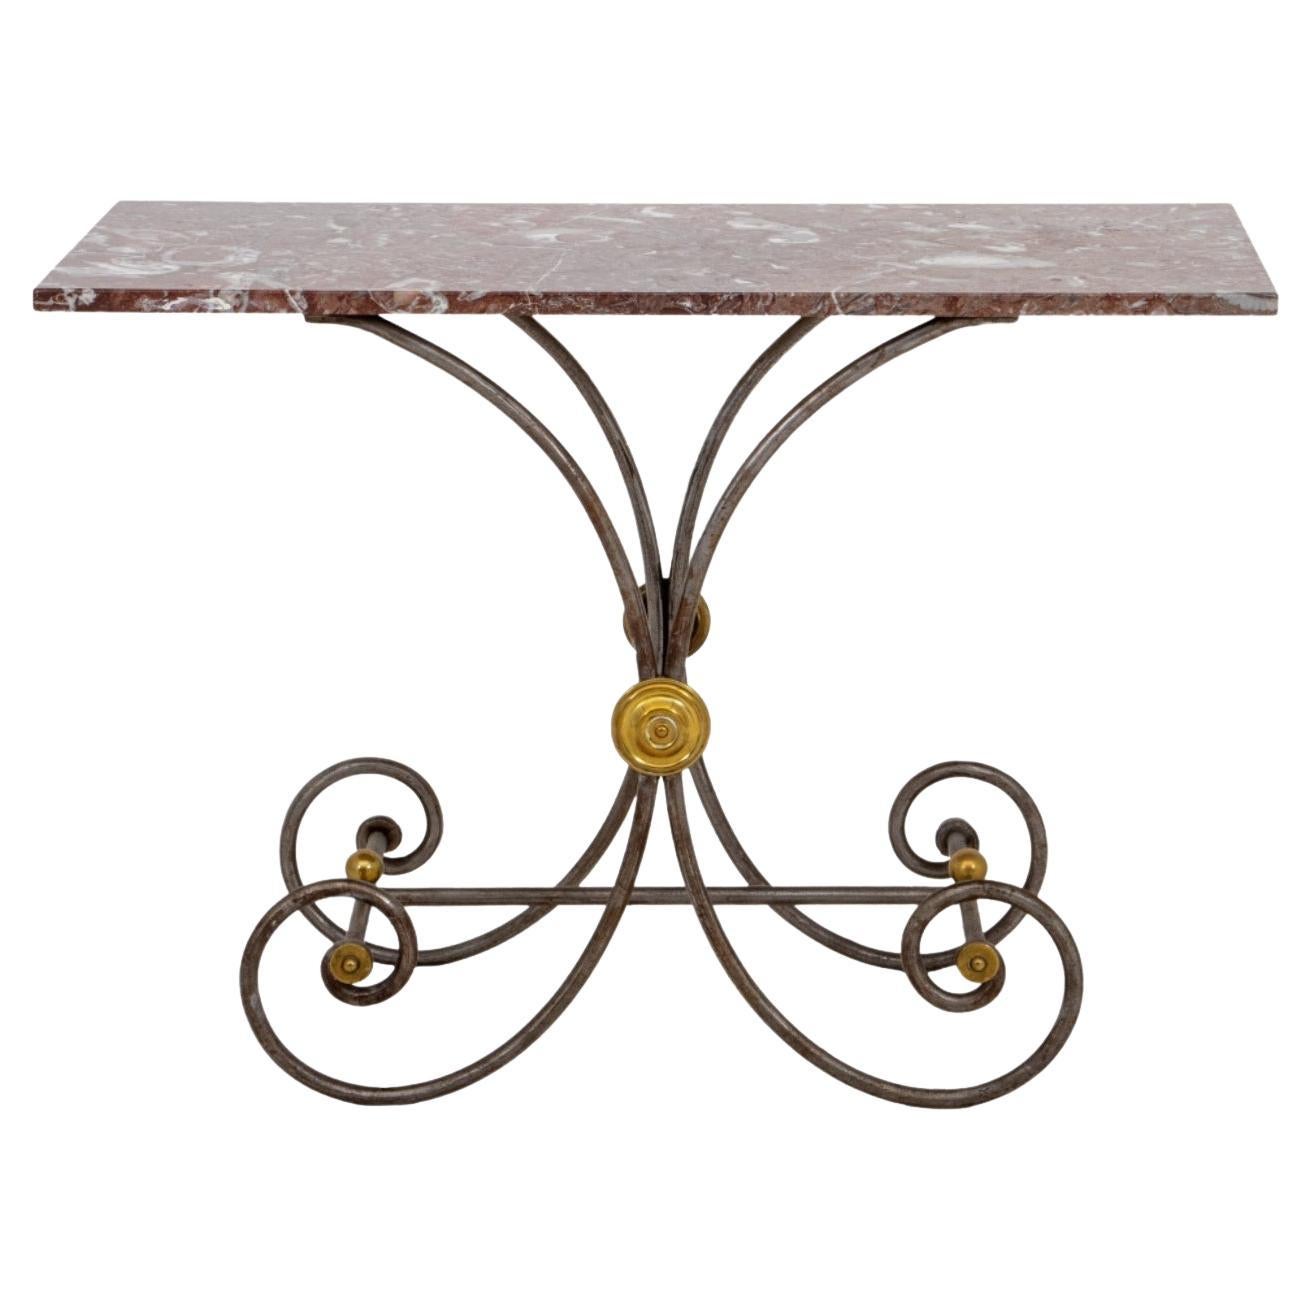 Neoclassical Wrought Iron Console / Baker Table